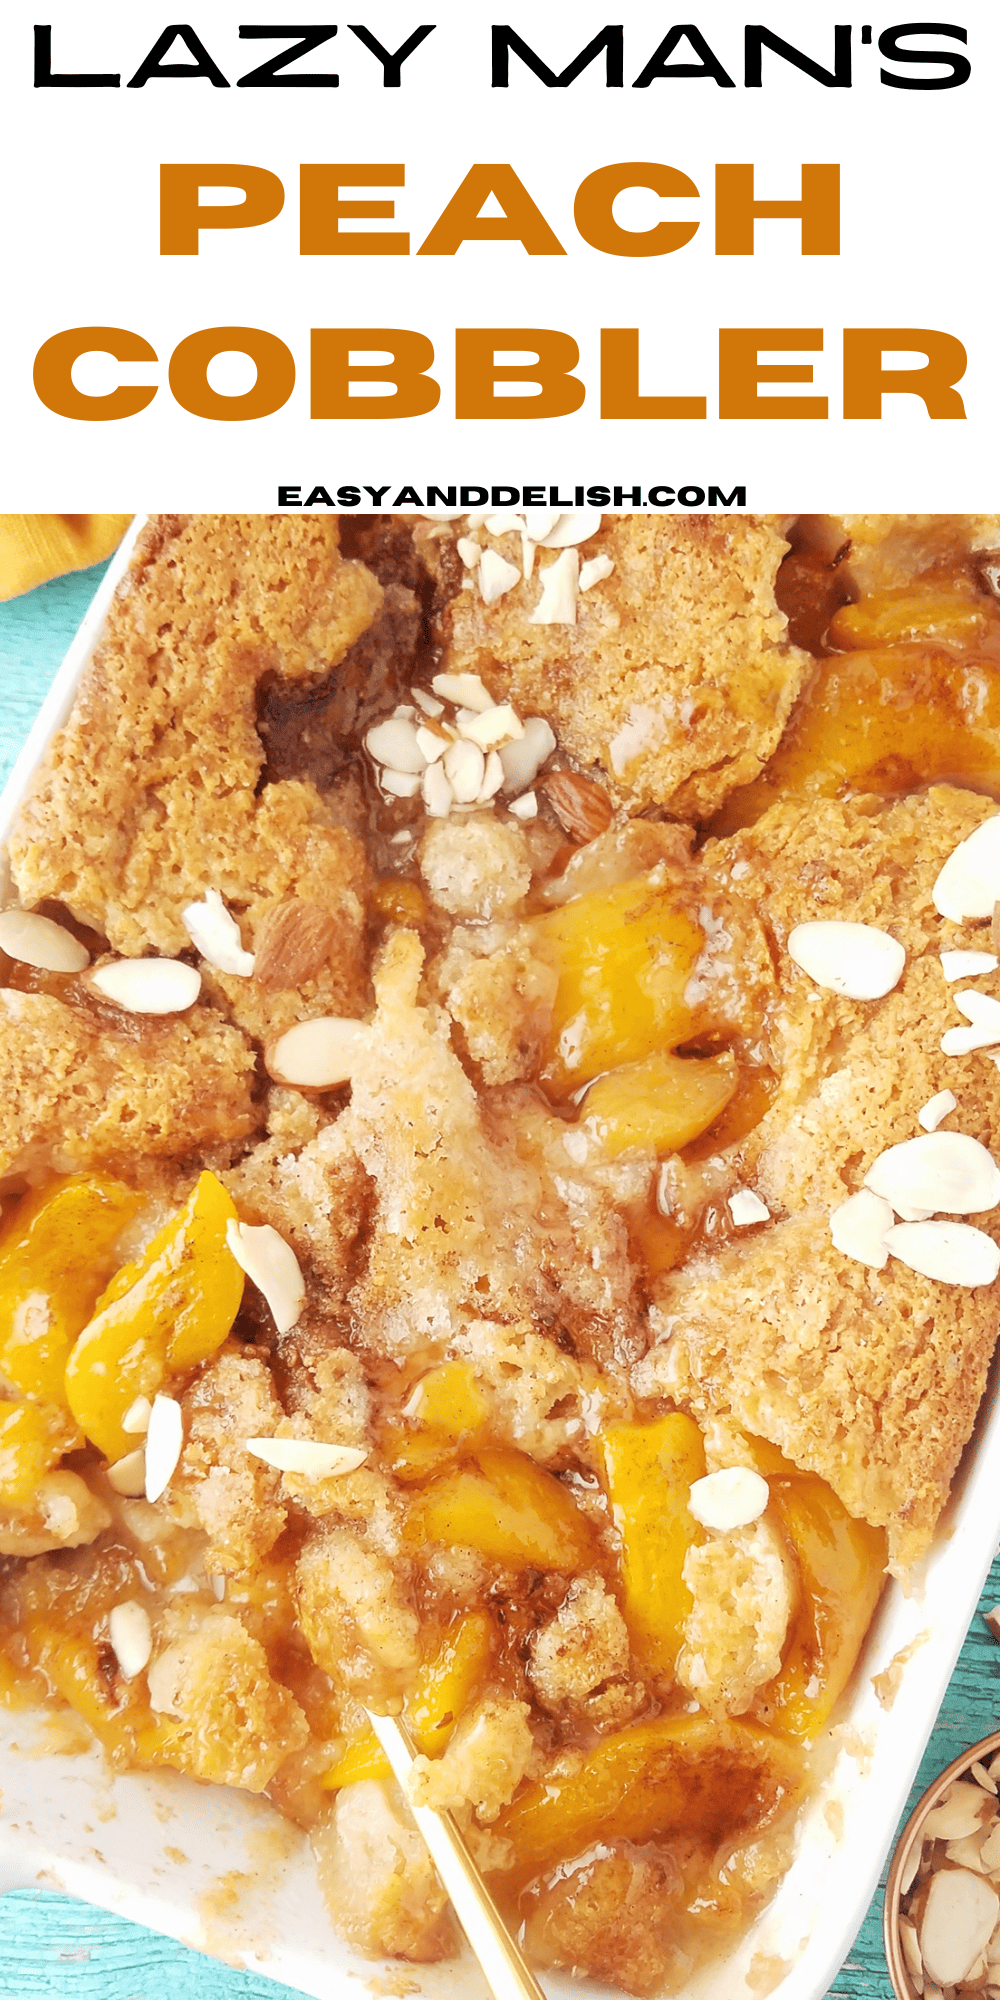 lazy man's peach cobbler with canned peaches and almond slices.